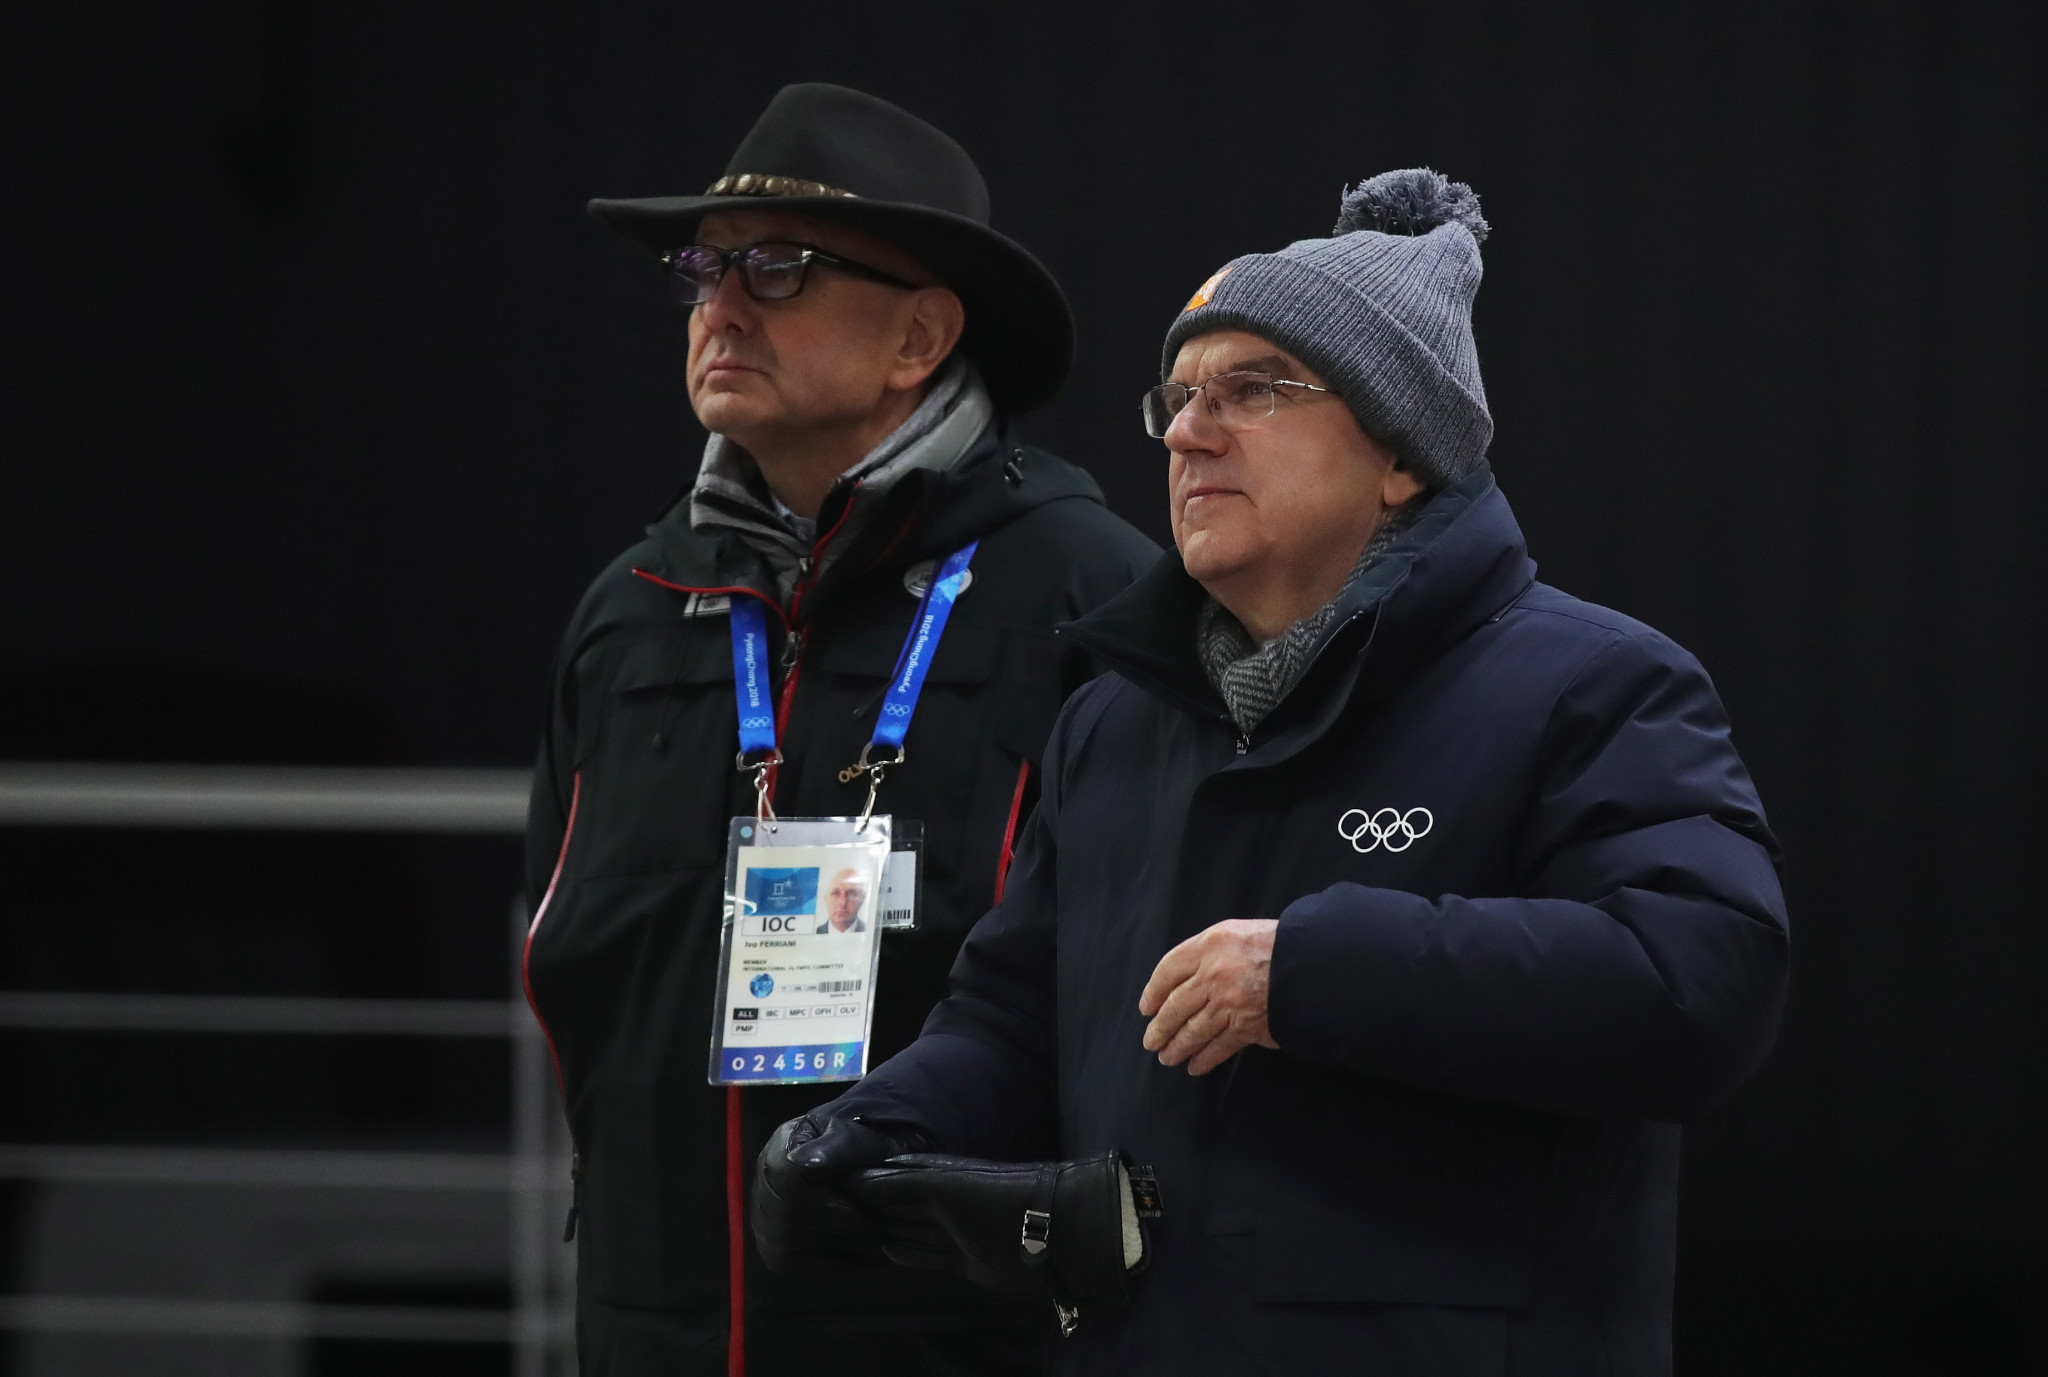 Ferriani is considered a loyal supporter of IOC President Thomas Bach, right ©Getty Images